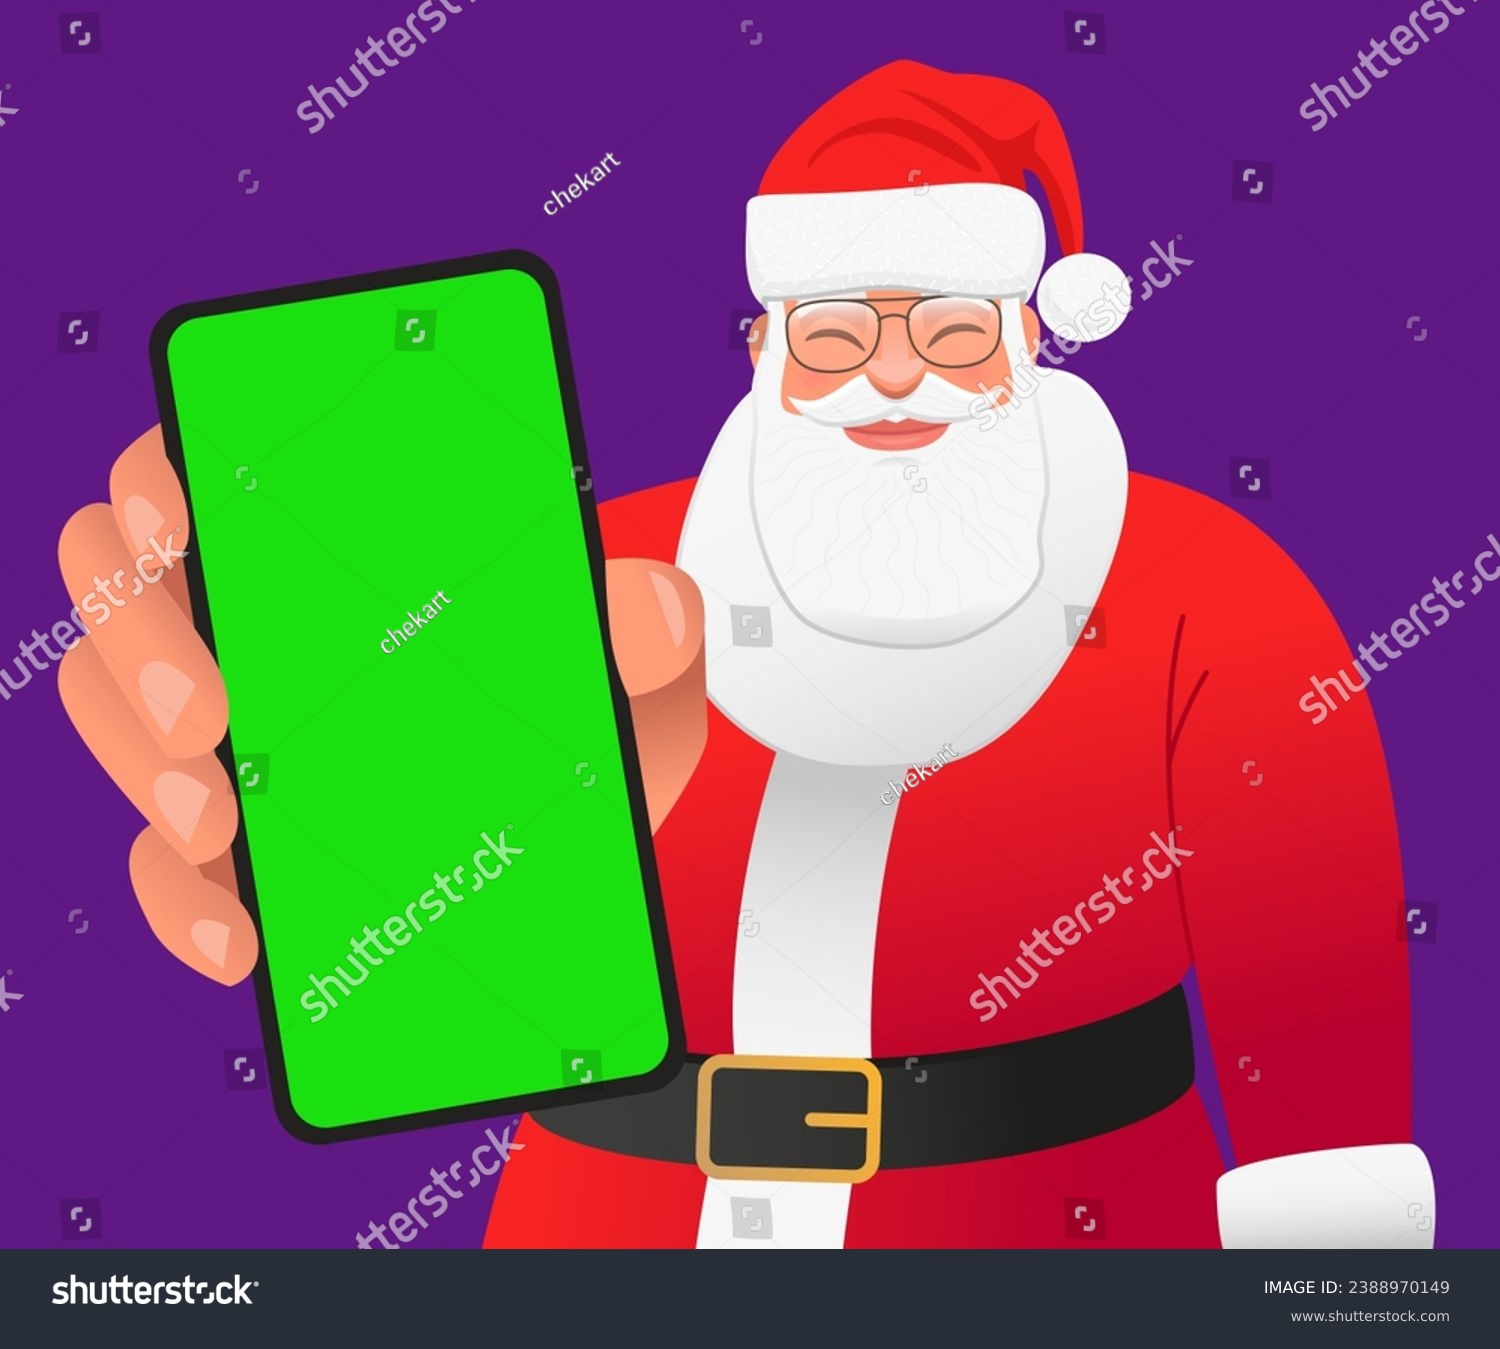 SVG of Smiling Santa Claus with glasses is standing with a smartphone in his hand. Cartoon Santa shows a close-up of a green phone screen to the camera. Place to advertise a mobile app. Vector illustration. svg